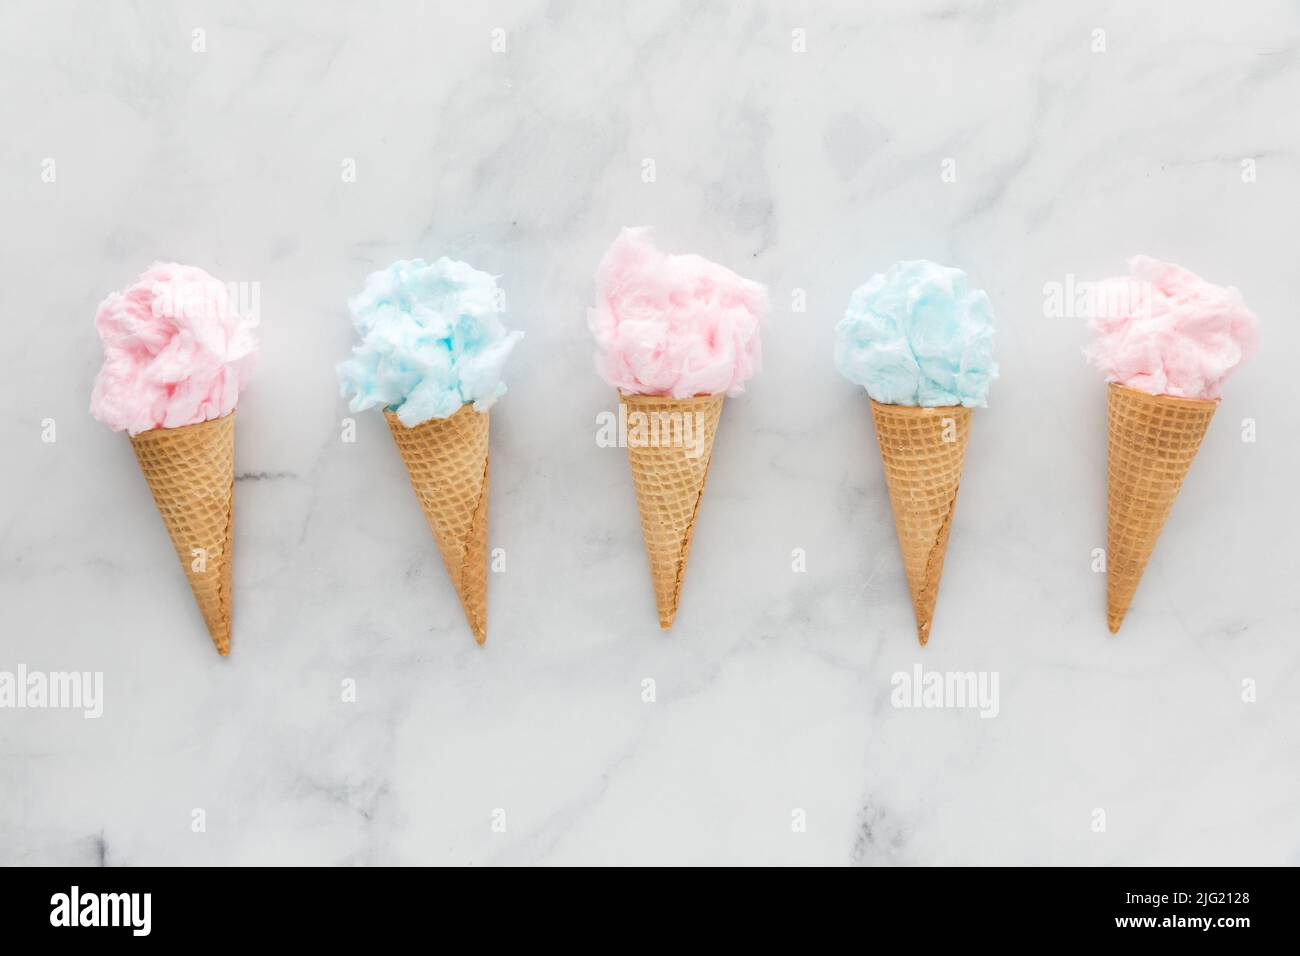 A row of waffle cones filled with cotton candy. Stock Photo